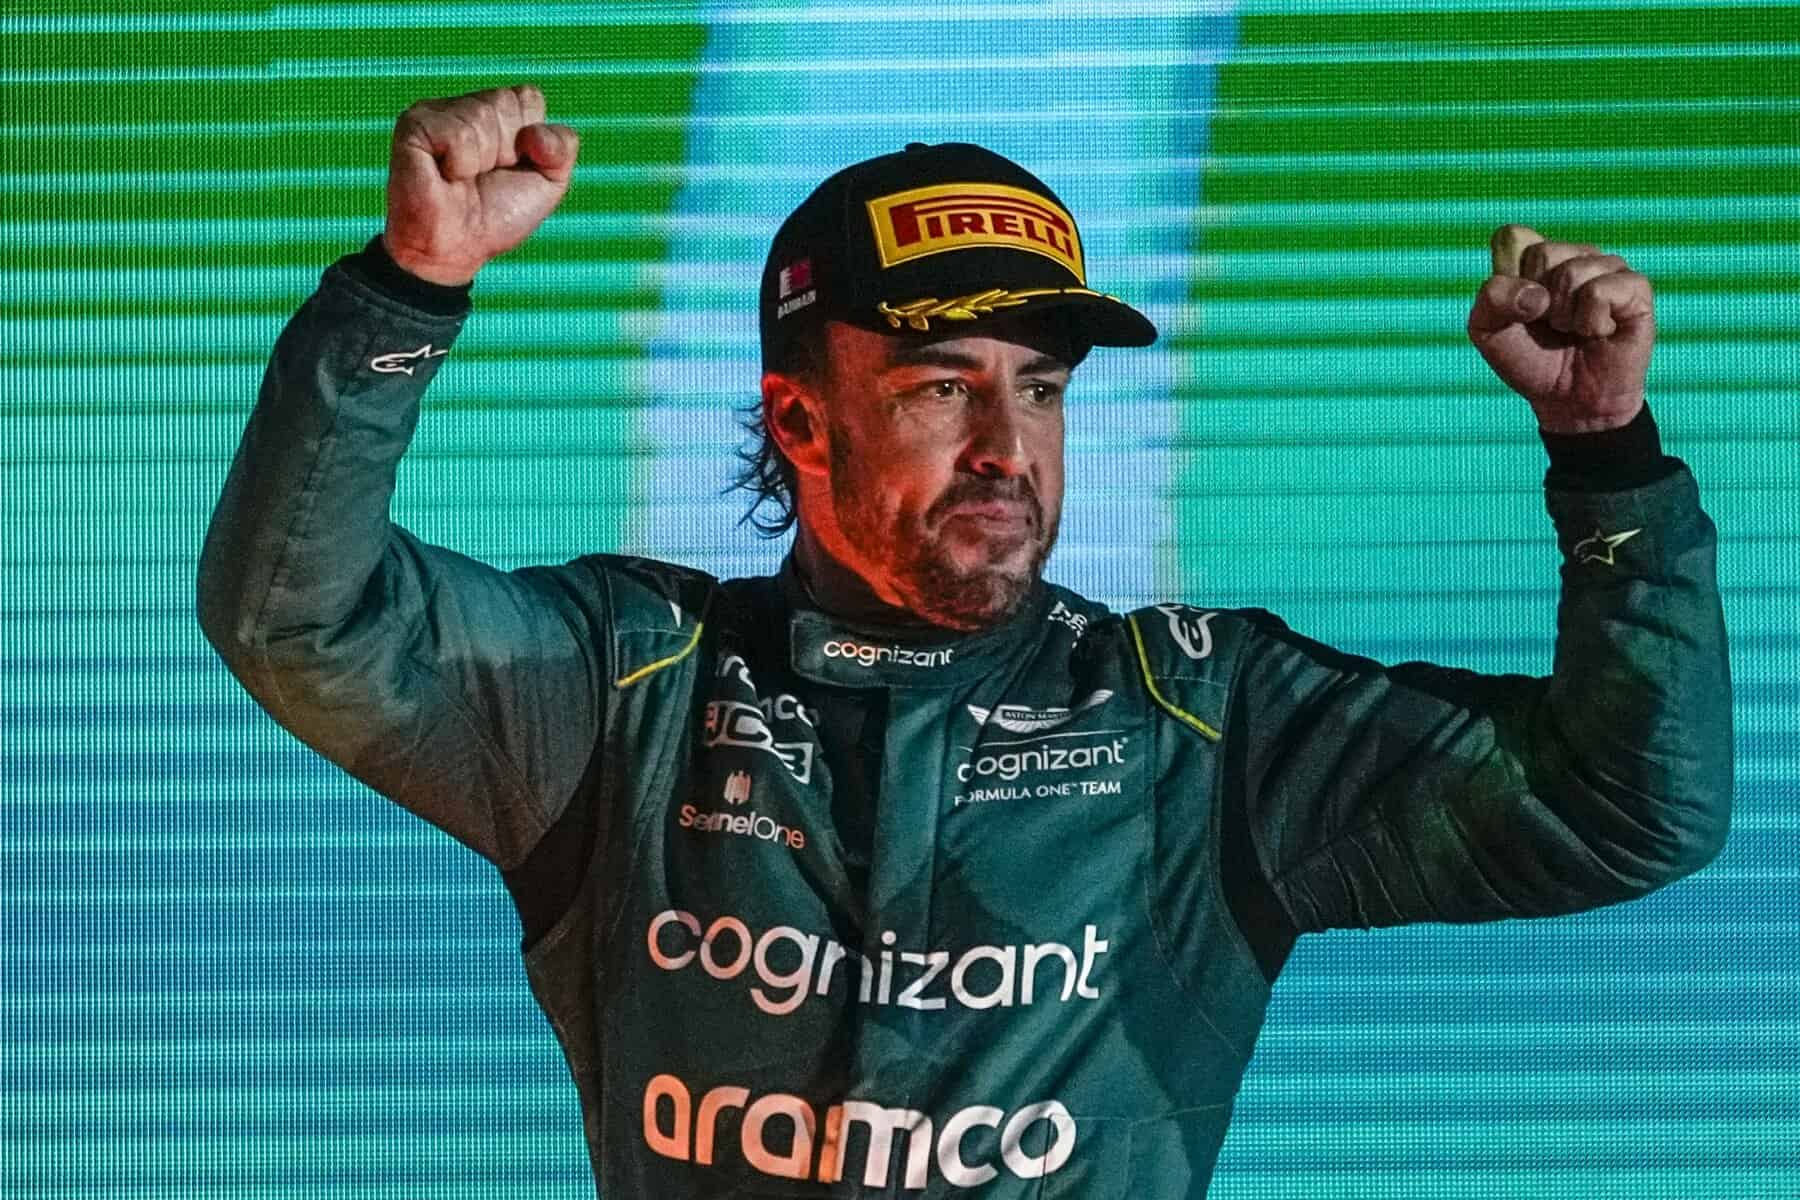 F1 DFS picks for the Saudi Arabian Grand Prix, including Sergio Perez and Fernando Alonso on the front row